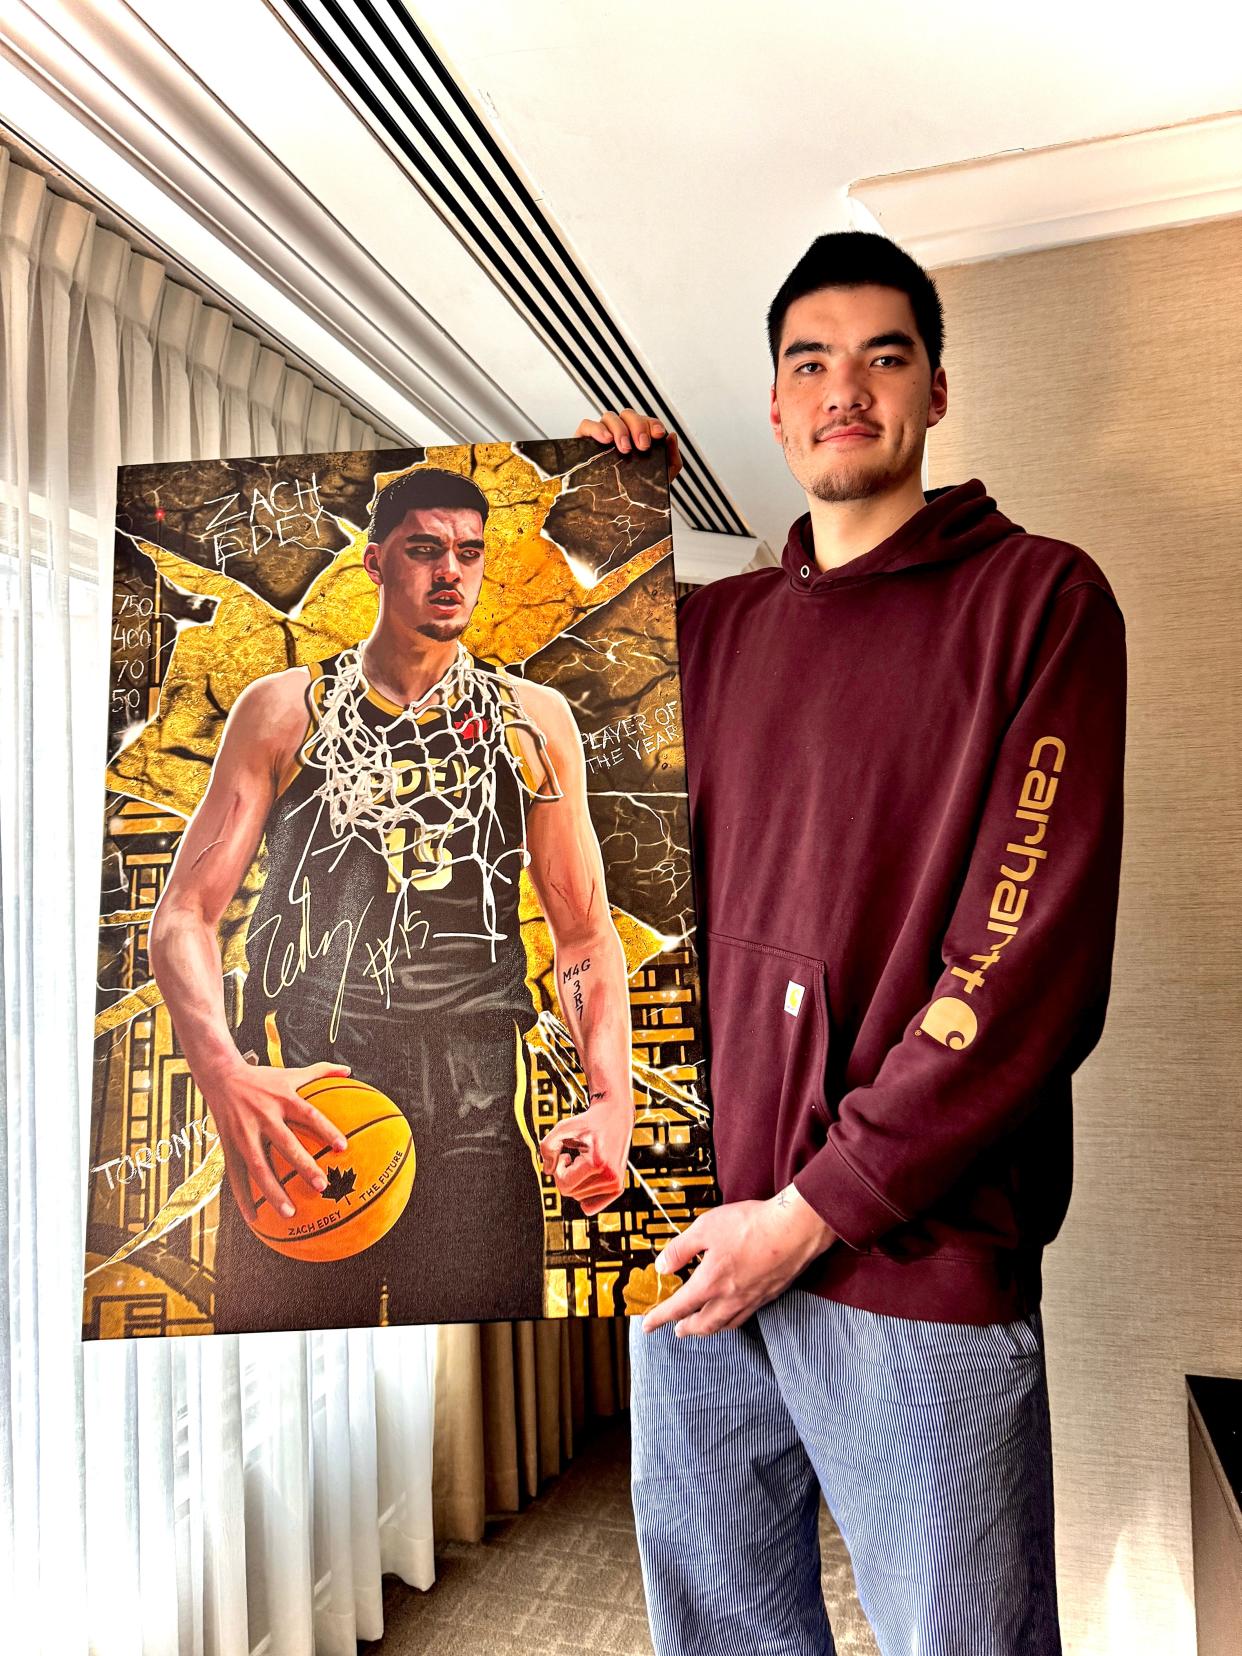 Purdue men's basketball star Zach Edey stands with a poster of himself.